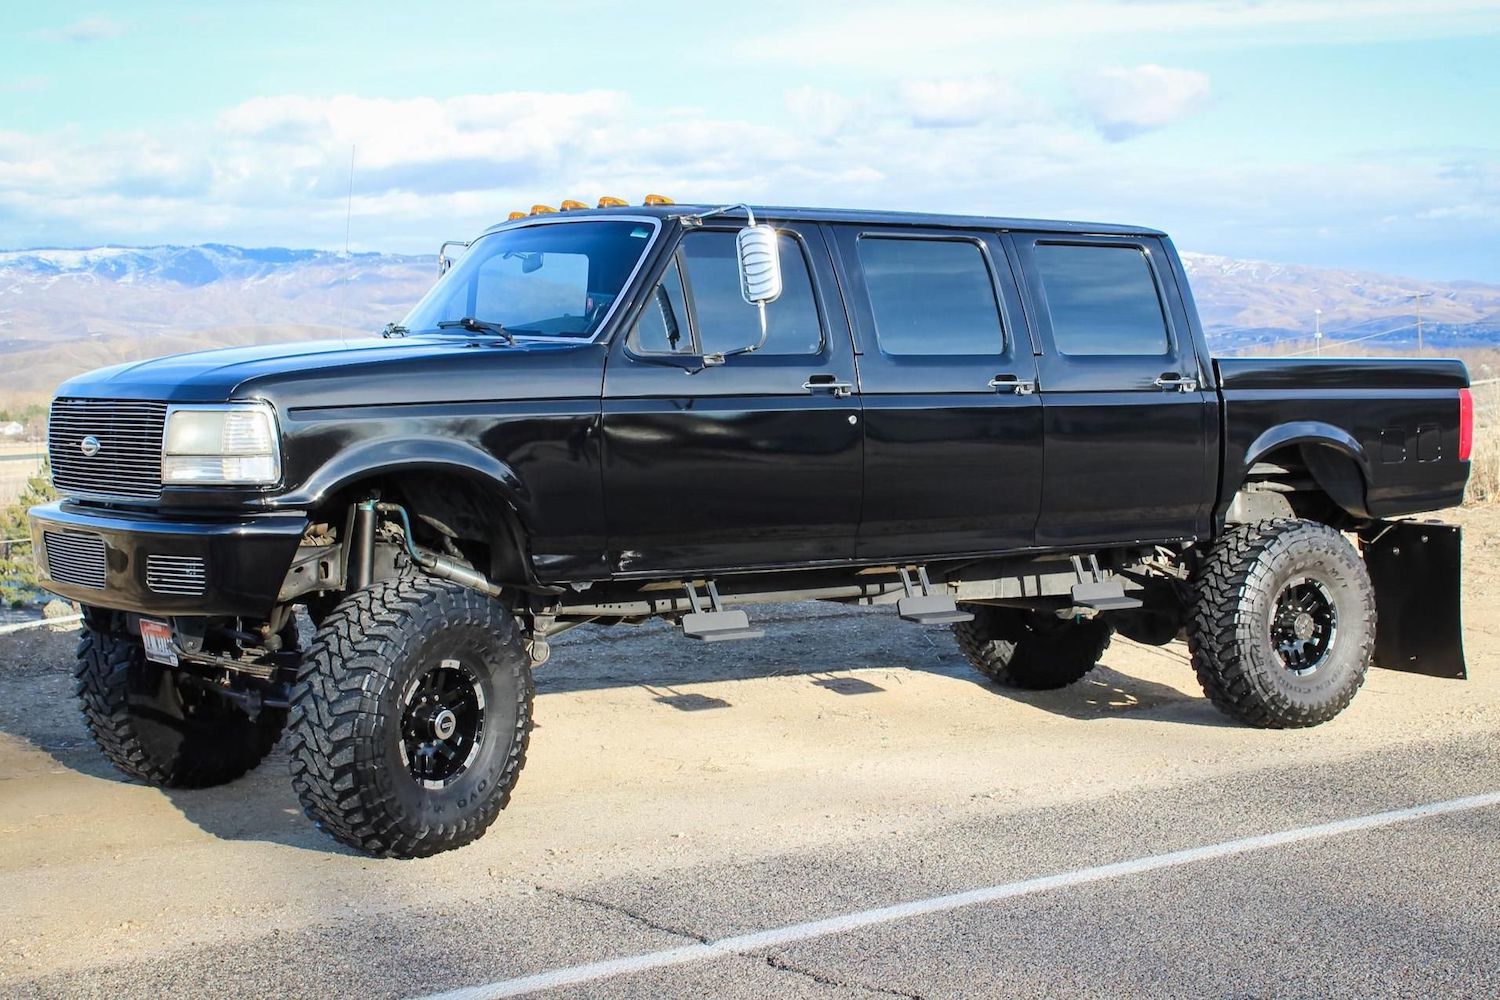 Six Door 1997 Ford F-350 With Nine-Inch Lift Kit Up For Auction